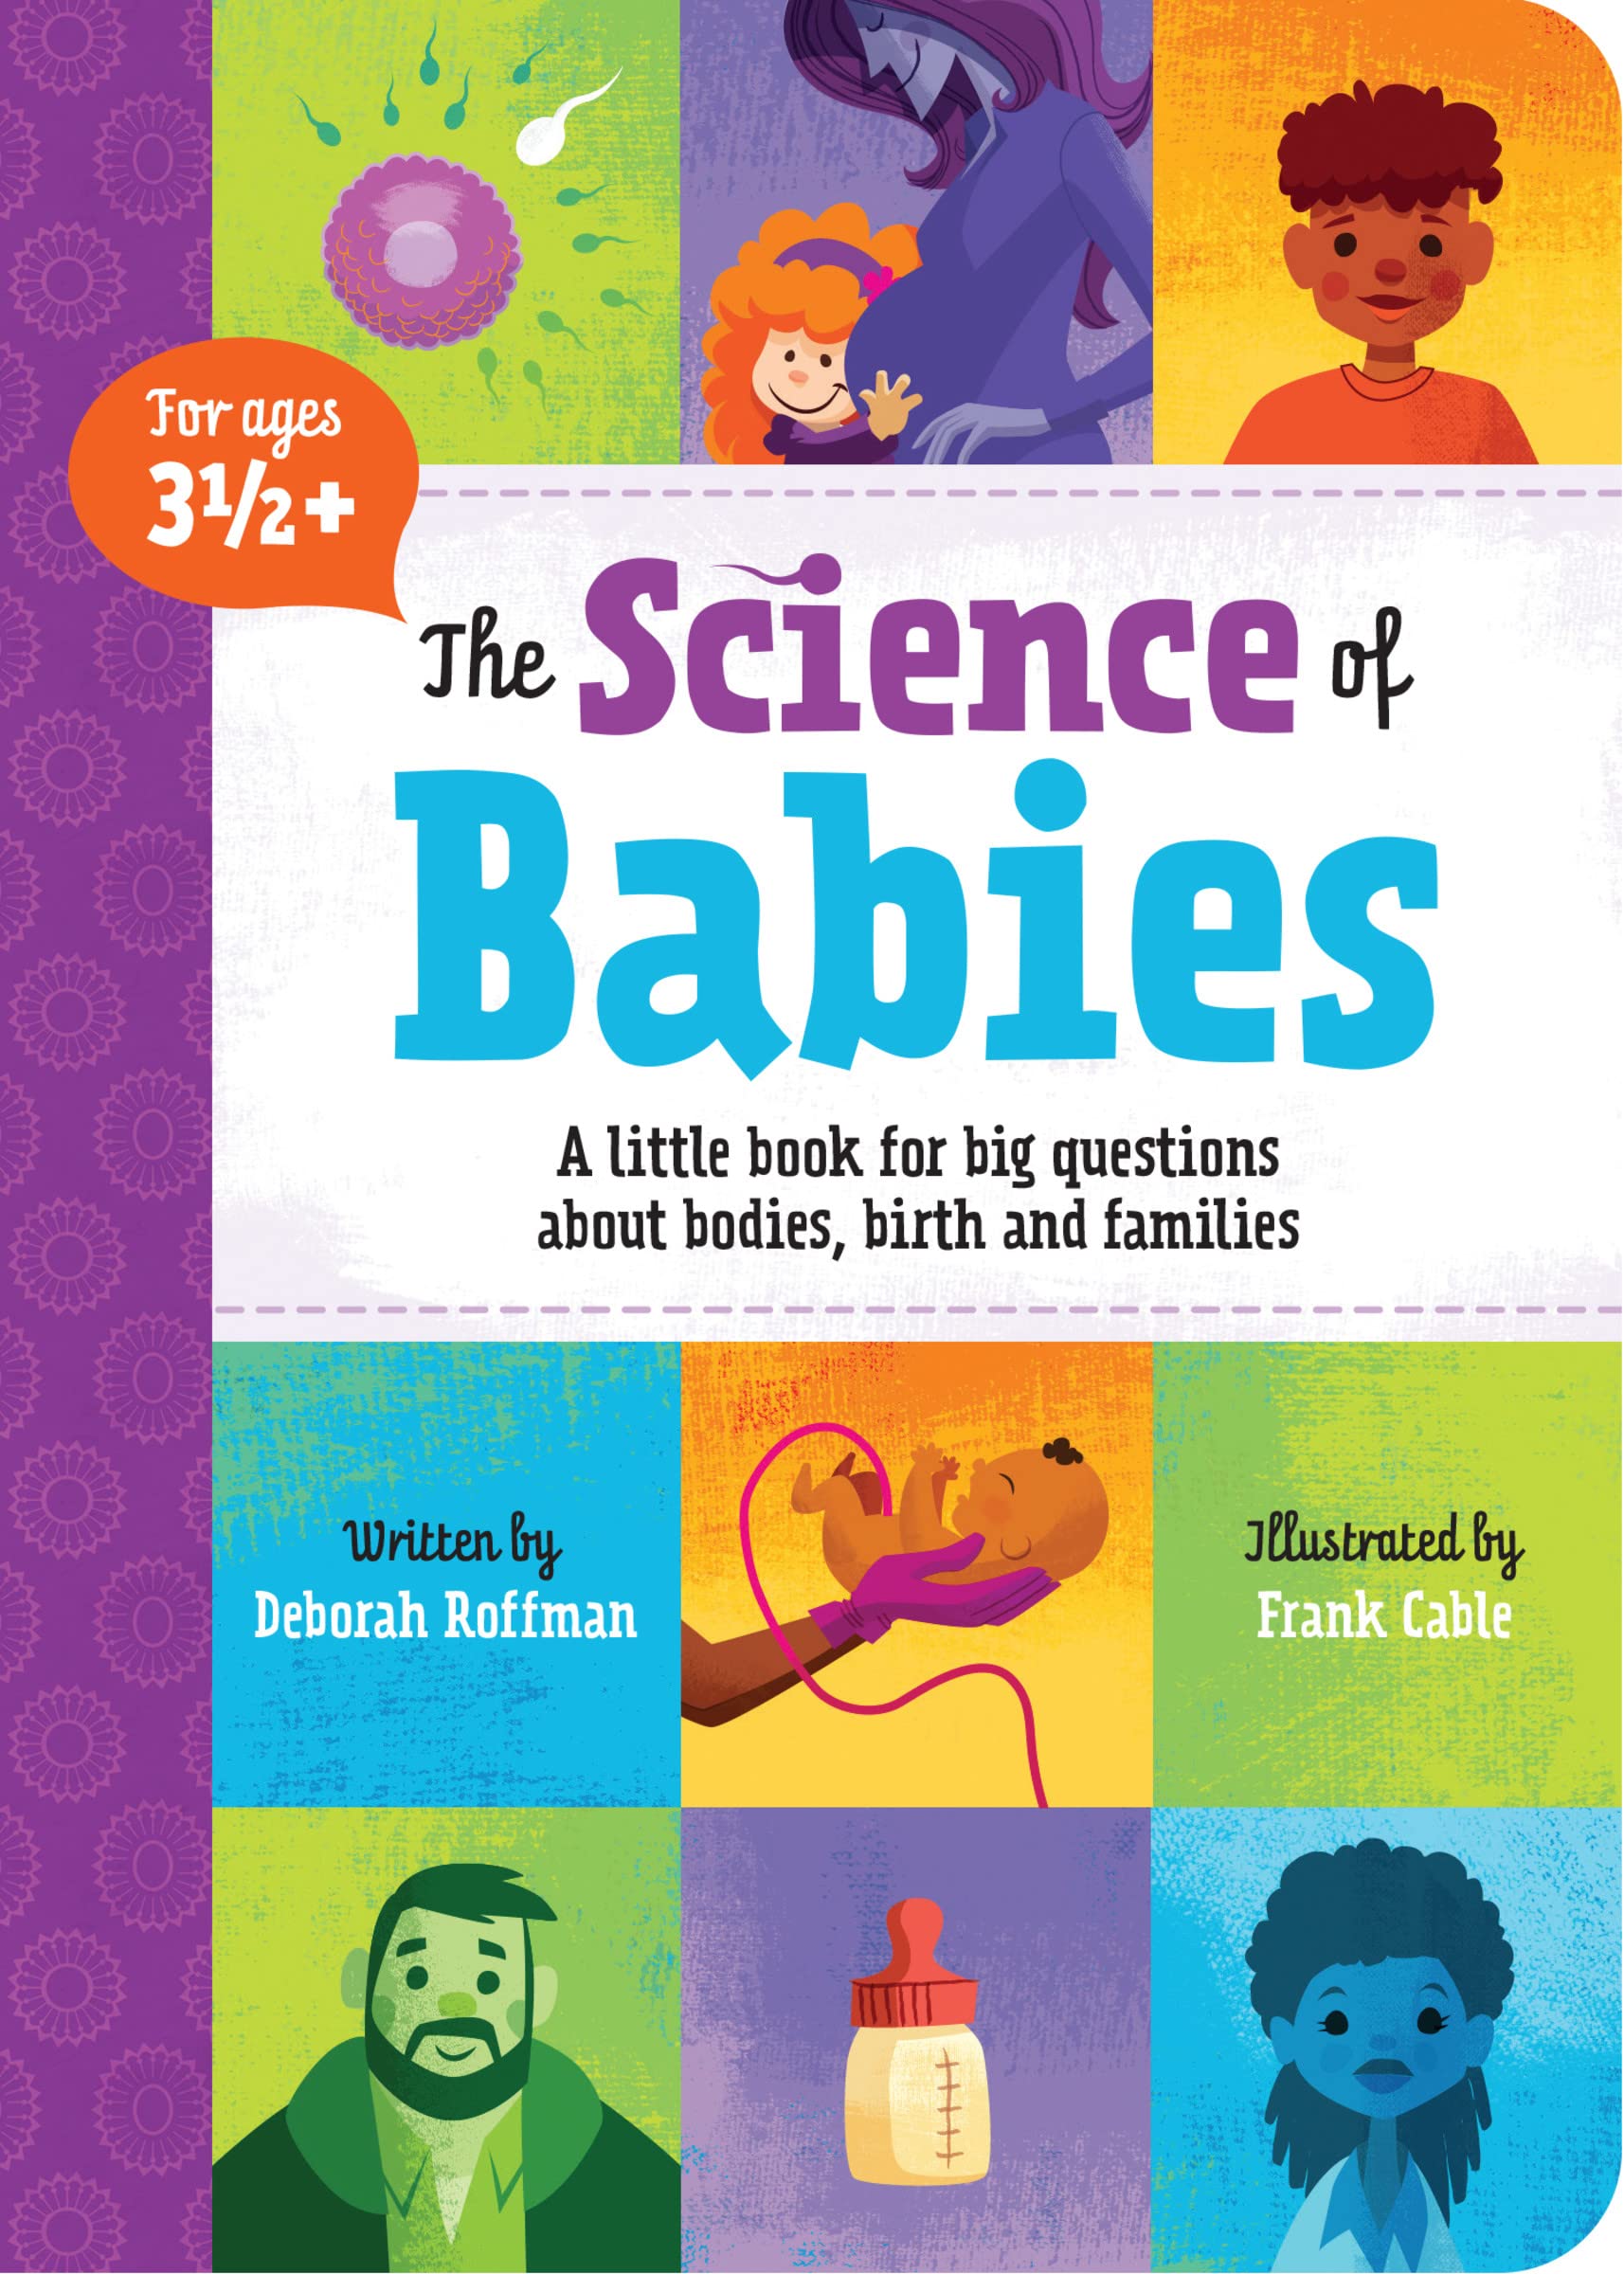 The Science of Babies by Deborah Roffman and Frank Cable - book cover - a patchwork collage of colorful illustrations of kids, adults, babies, sperm, etc.